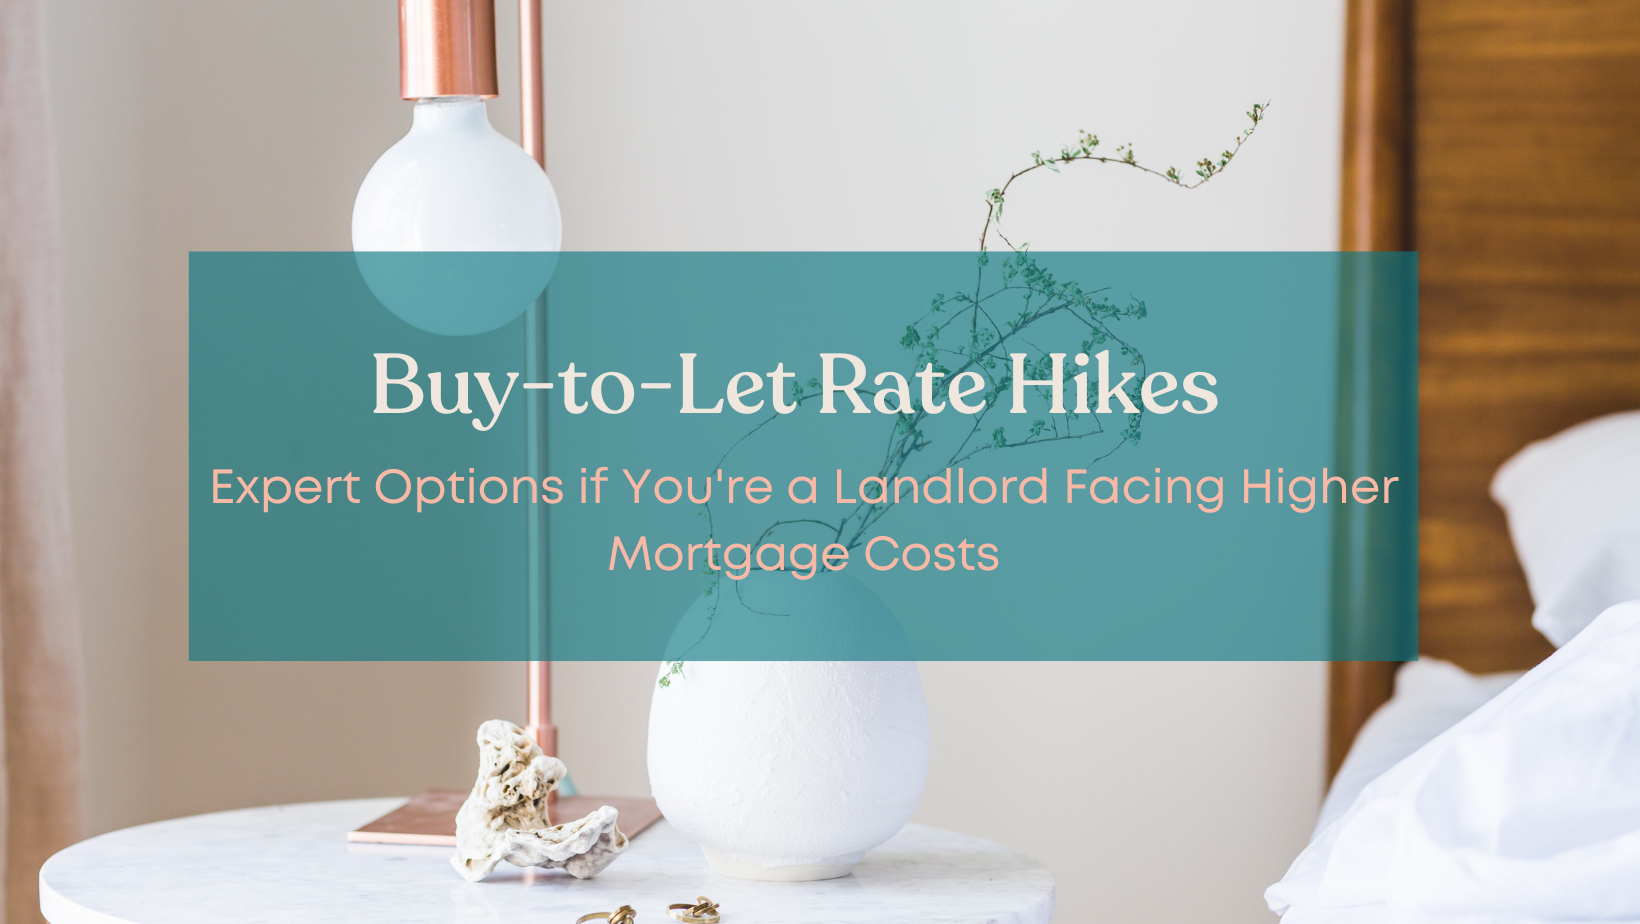 Buy-to-Let Rate Hikes